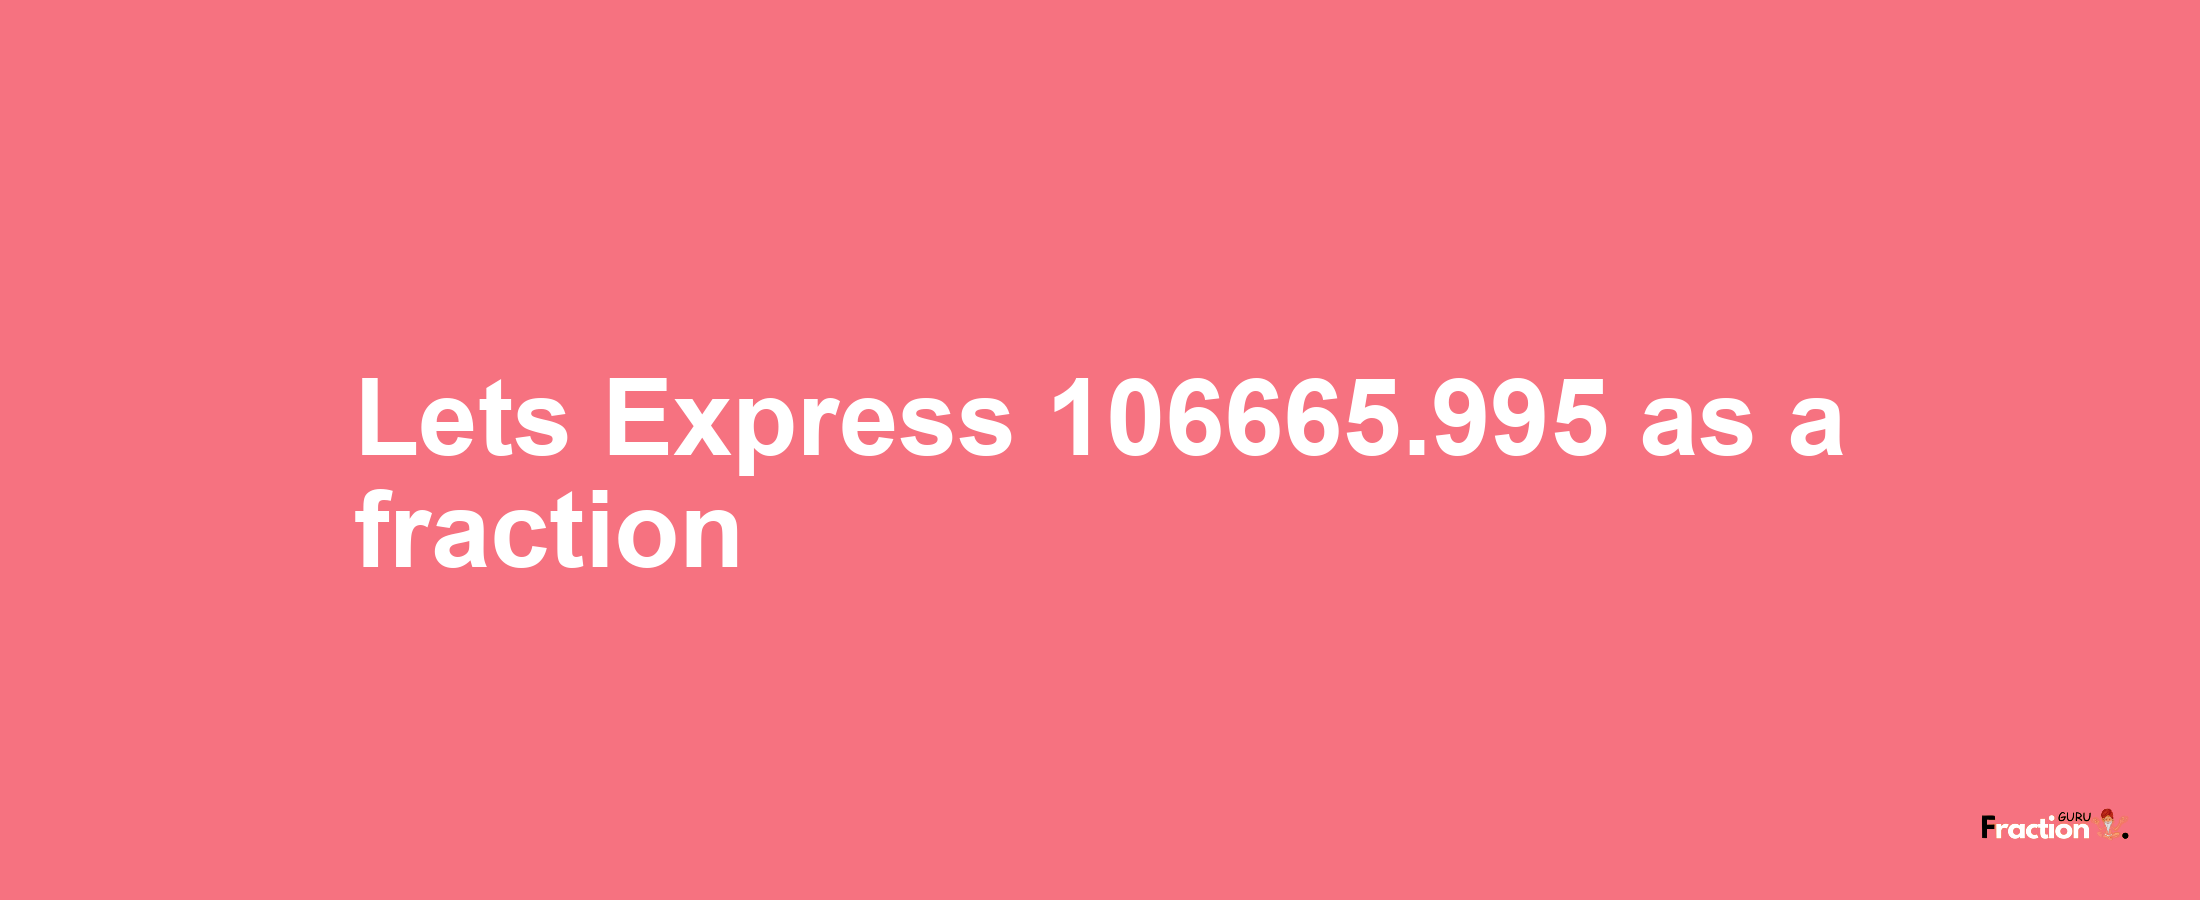 Lets Express 106665.995 as afraction